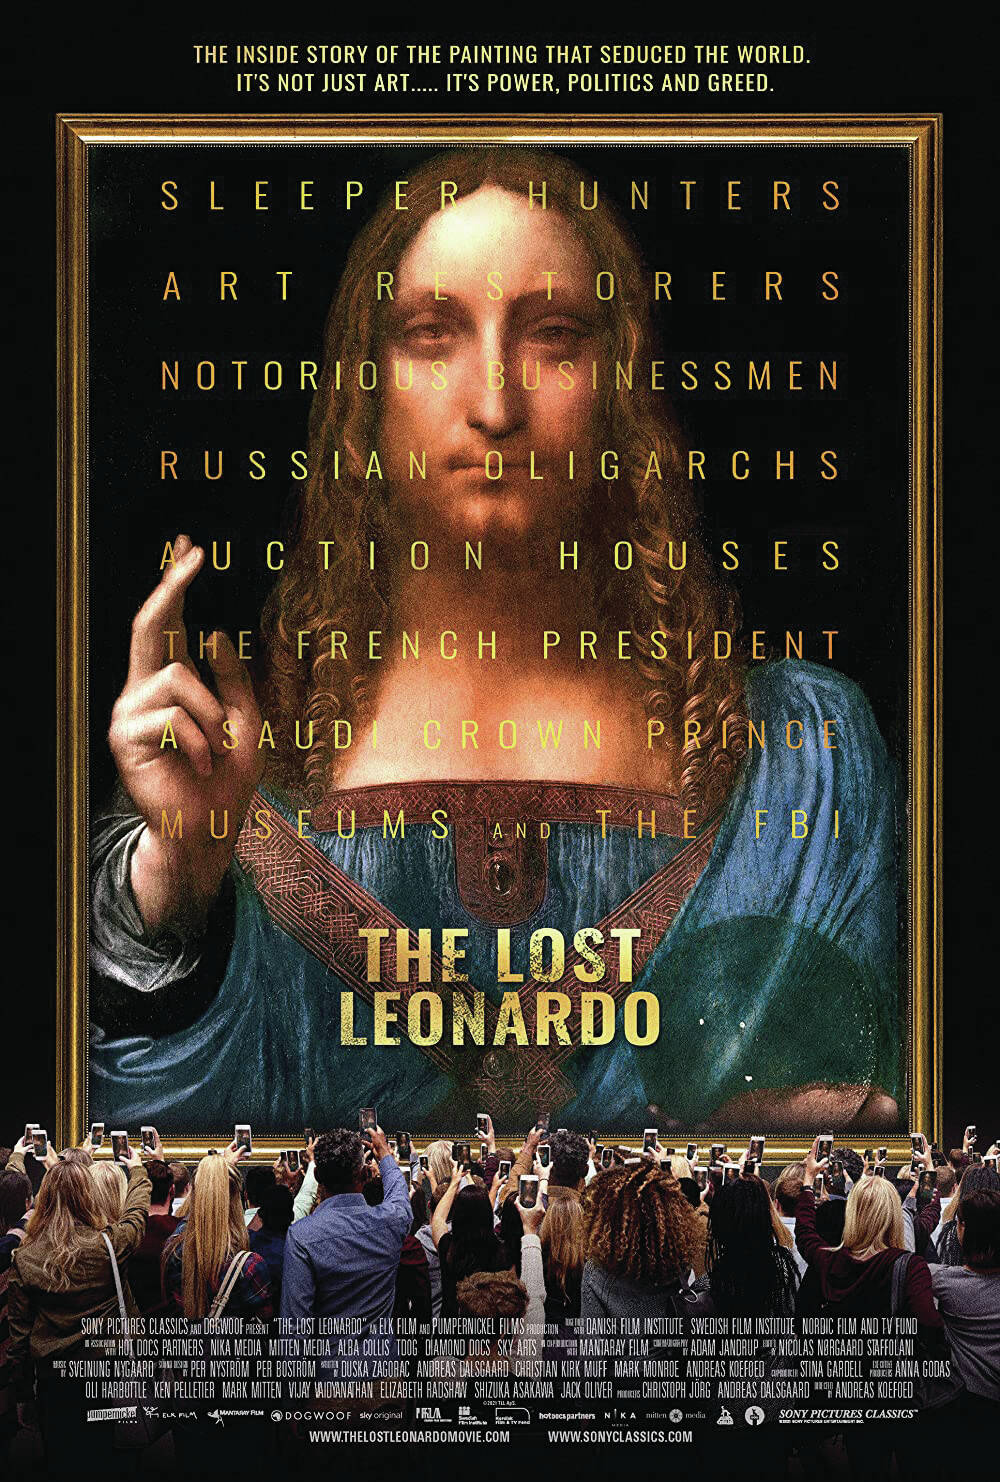 The poster for “The Lost Leonardo,” showing at the 17th annual Homer Documentary Film Festival. (Photo provided)